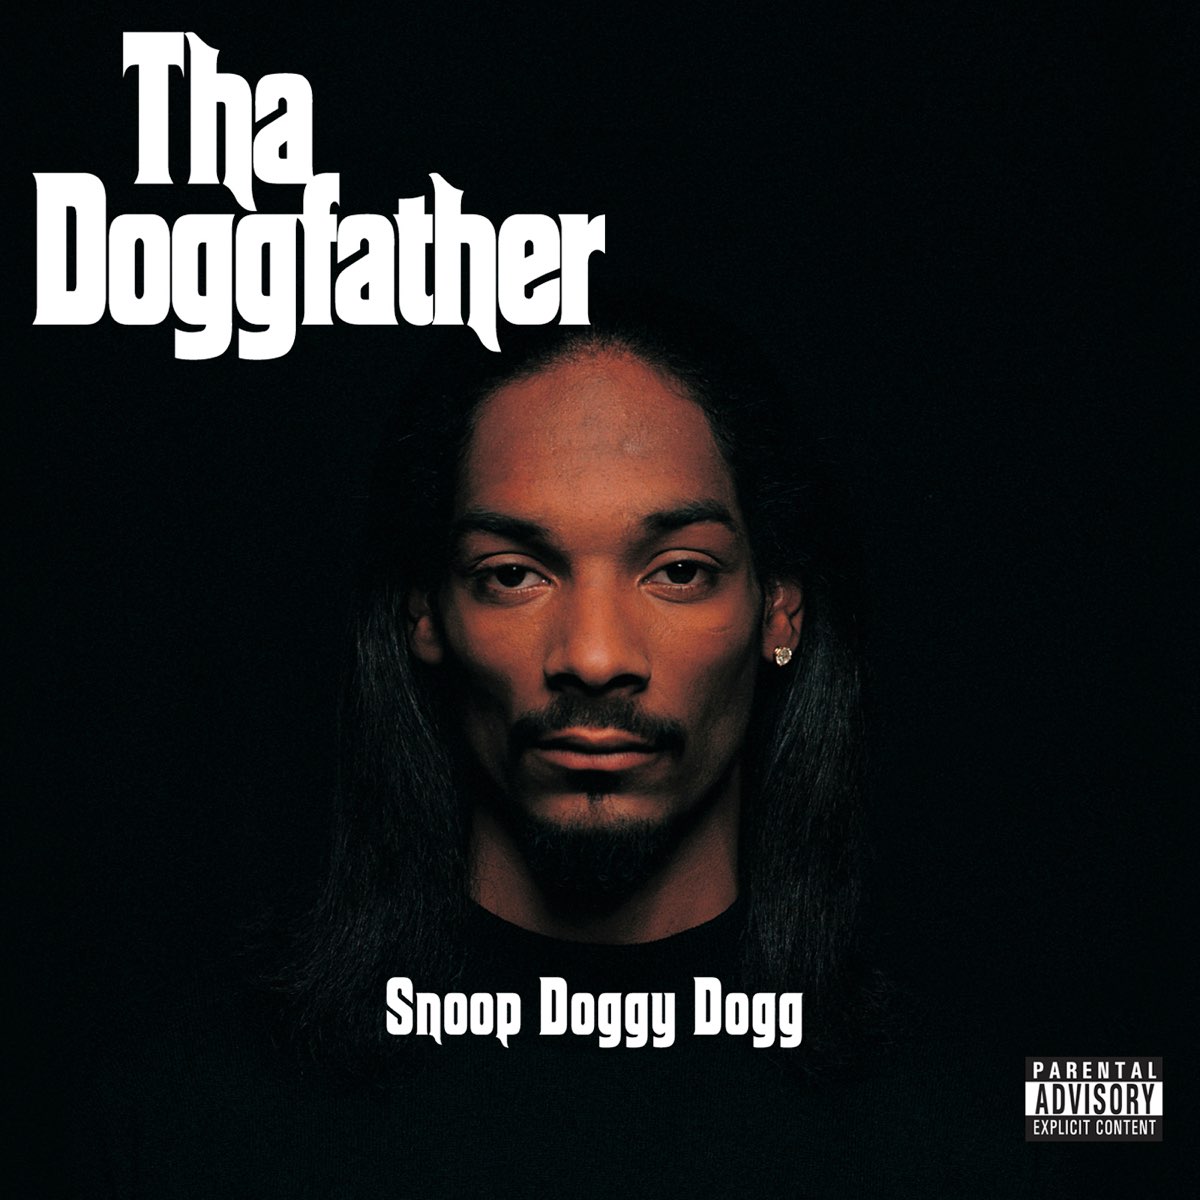 ‎Tha Doggfather by Snoop Dogg on Apple Music